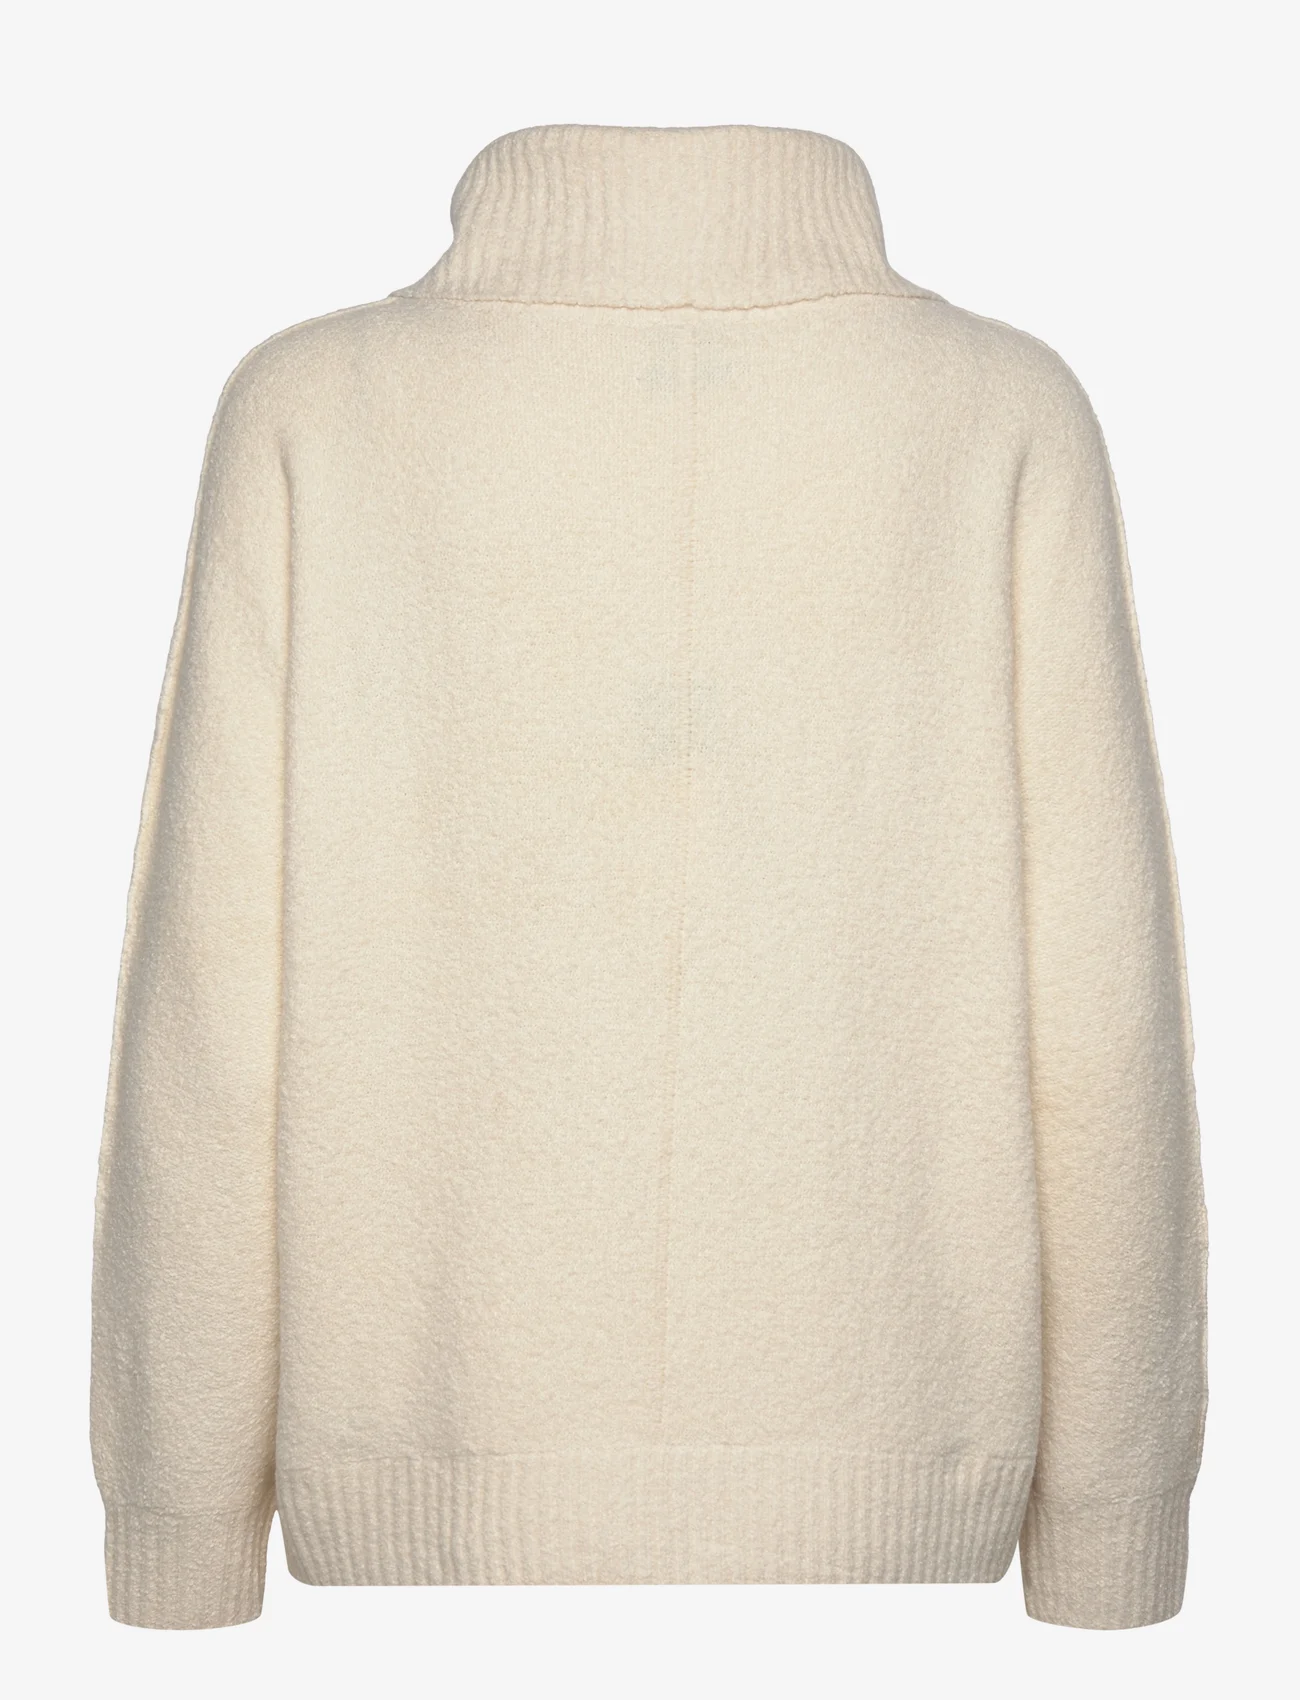 Tom Tailor - Knit boucle batwing - pullover - soft beige solid - 1